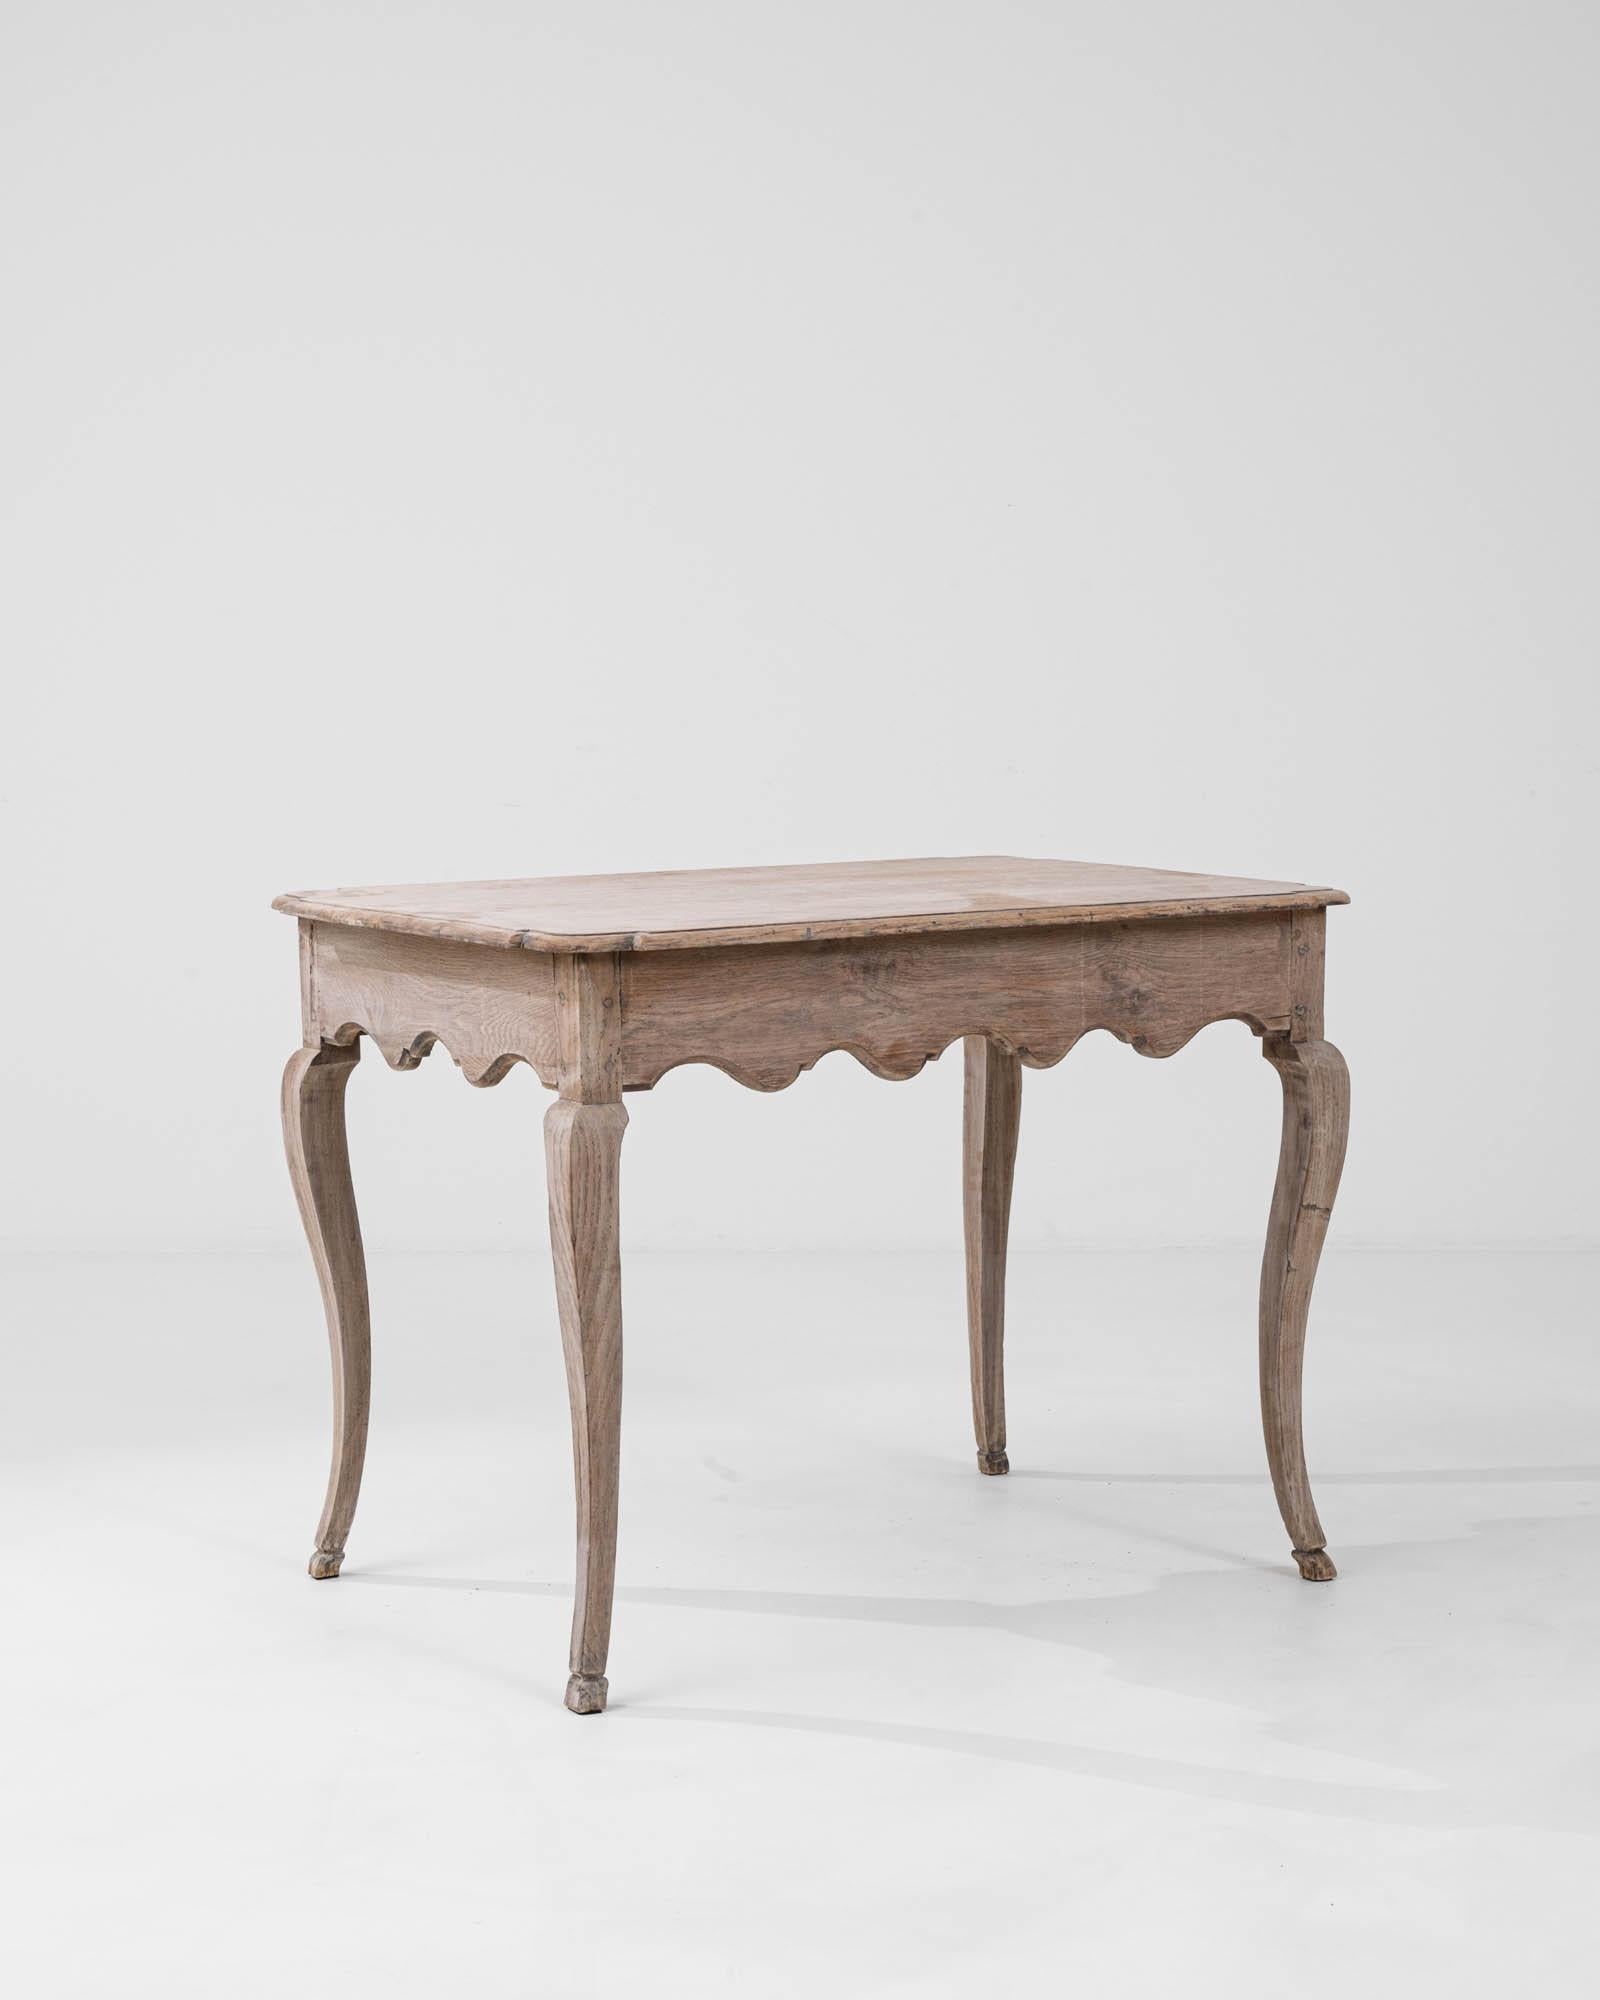 Introducing an exquisite piece of history—our 19th Century French Bleached Oak Side Table. This beautifully preserved table showcases the fine craftsmanship of its era, featuring a bleached oak finish that highlights the wood's natural grain and